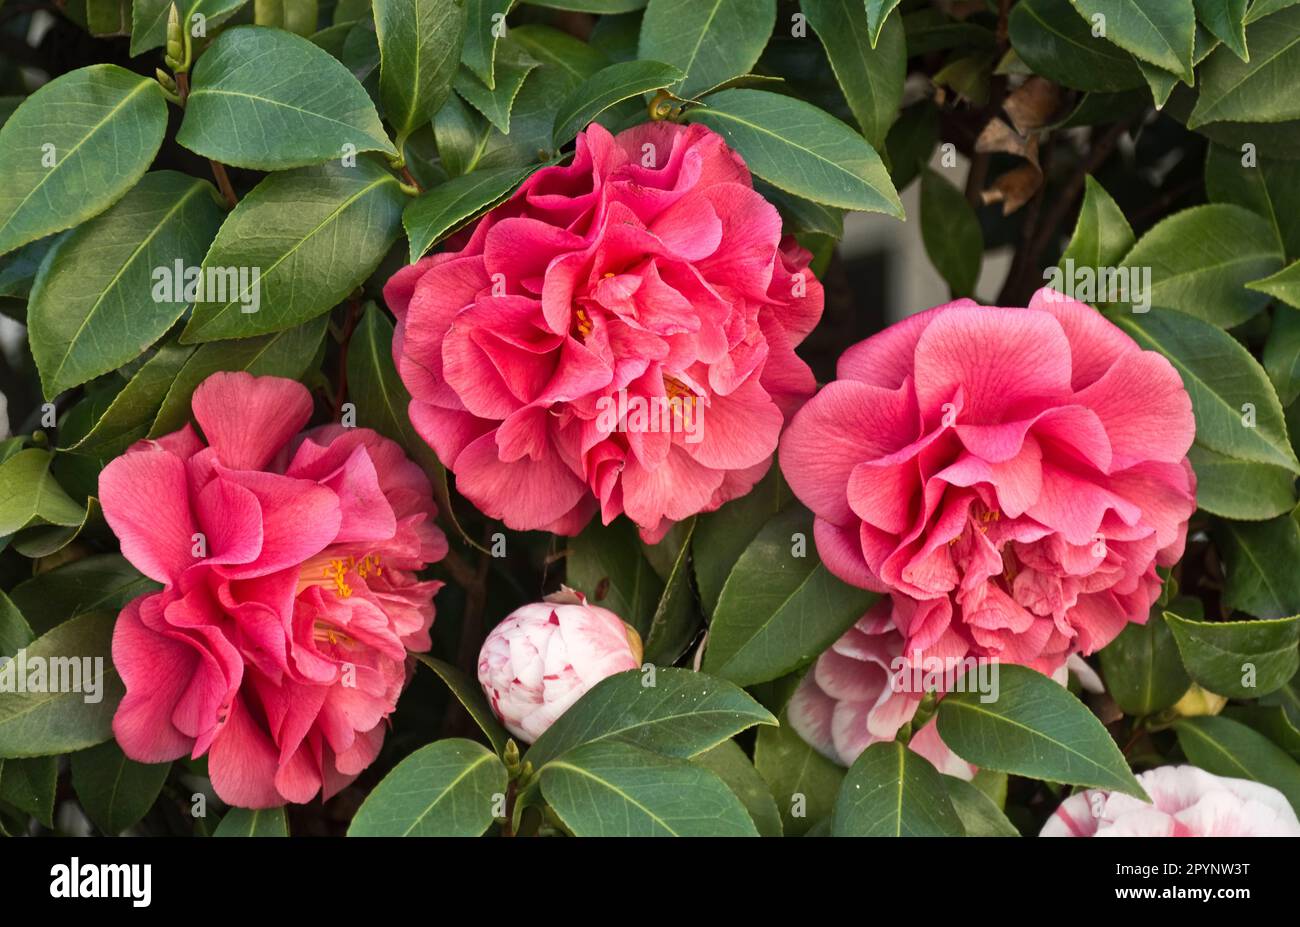 Romantic and elegant red camellia flowers with green leaves blossom in early Spring Stock Photo